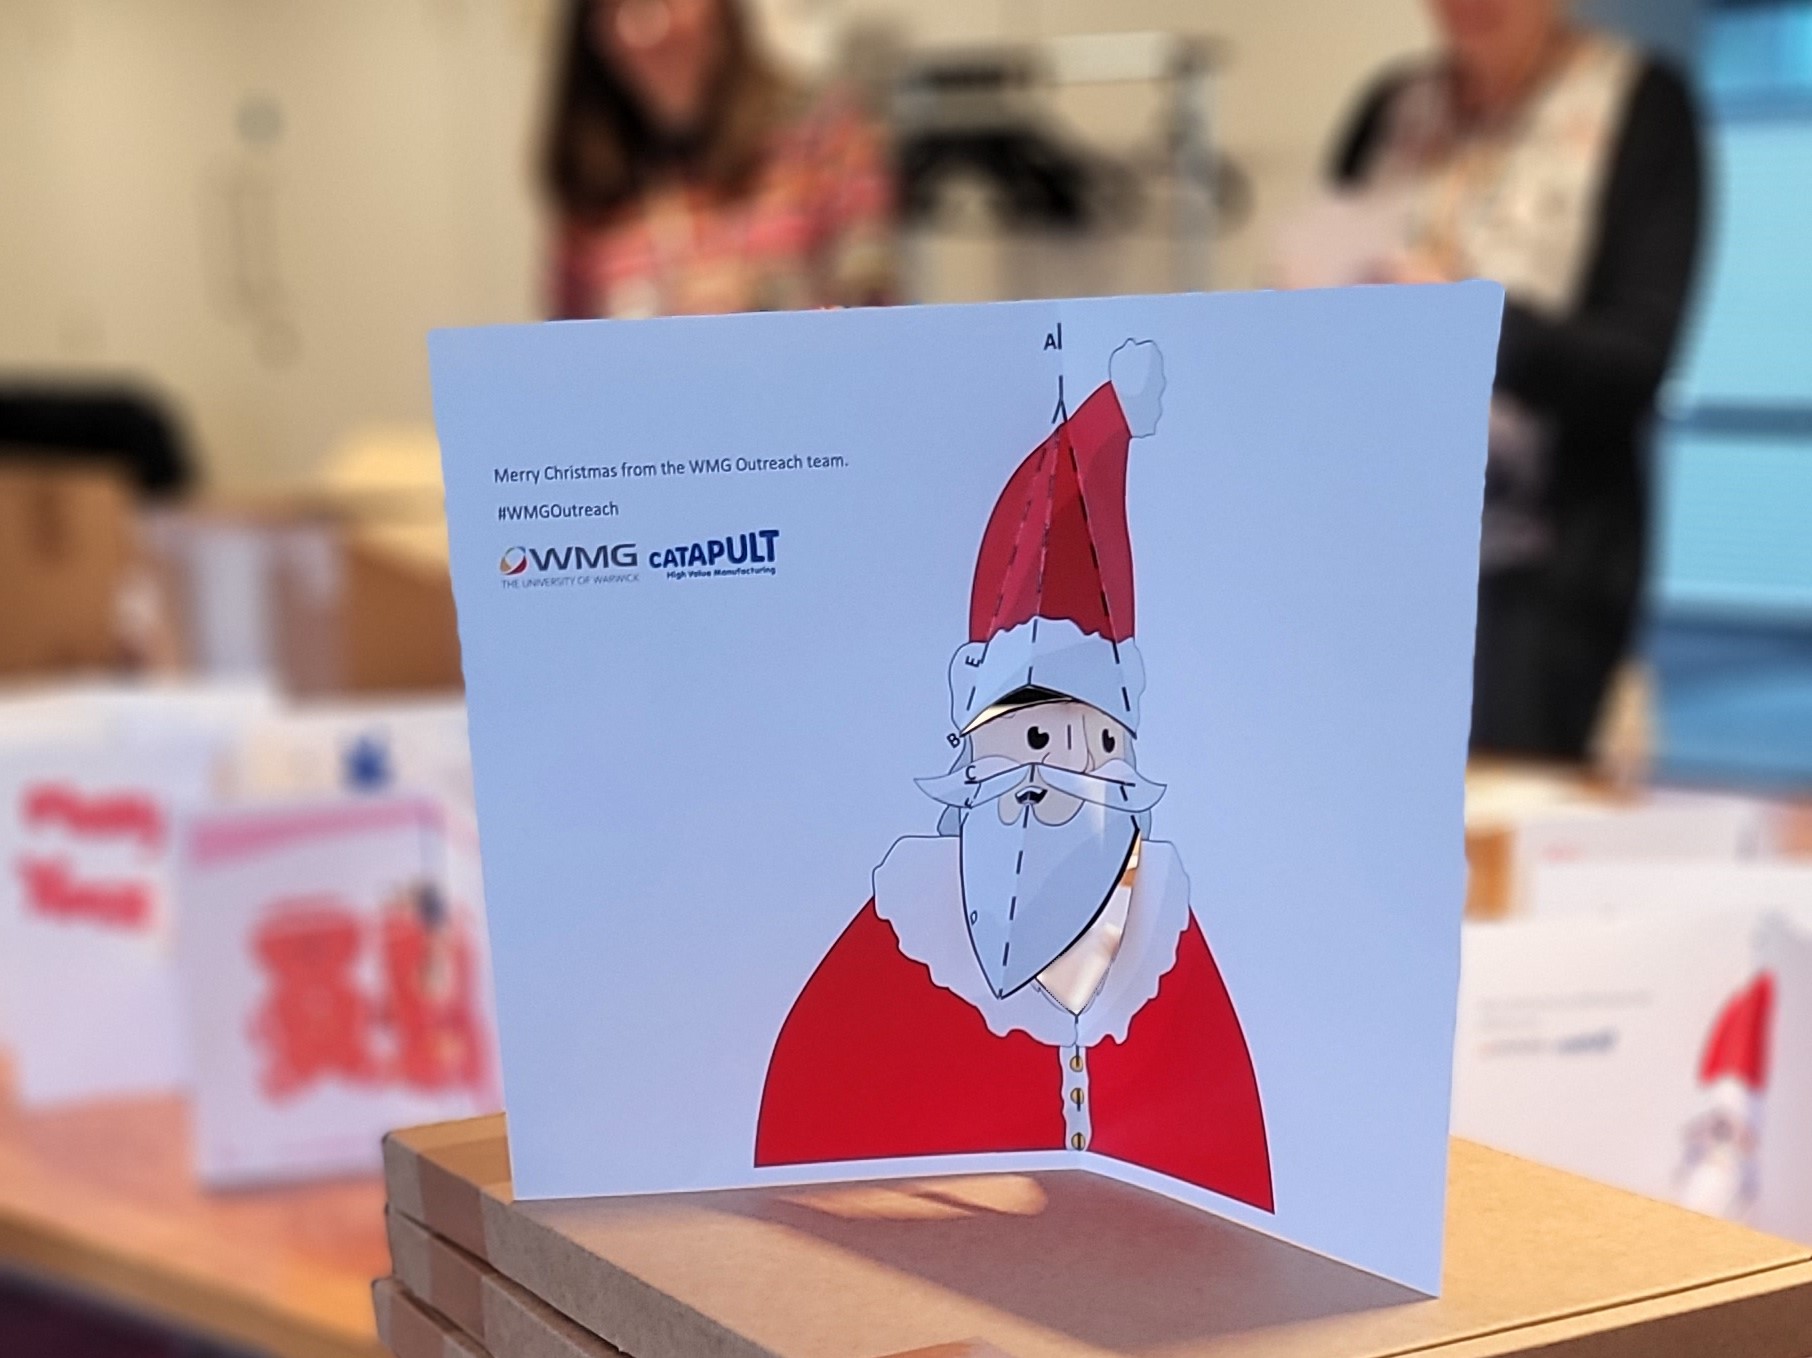 a pop-up card shows Father Christmas with his beard and hat popping out from the card.